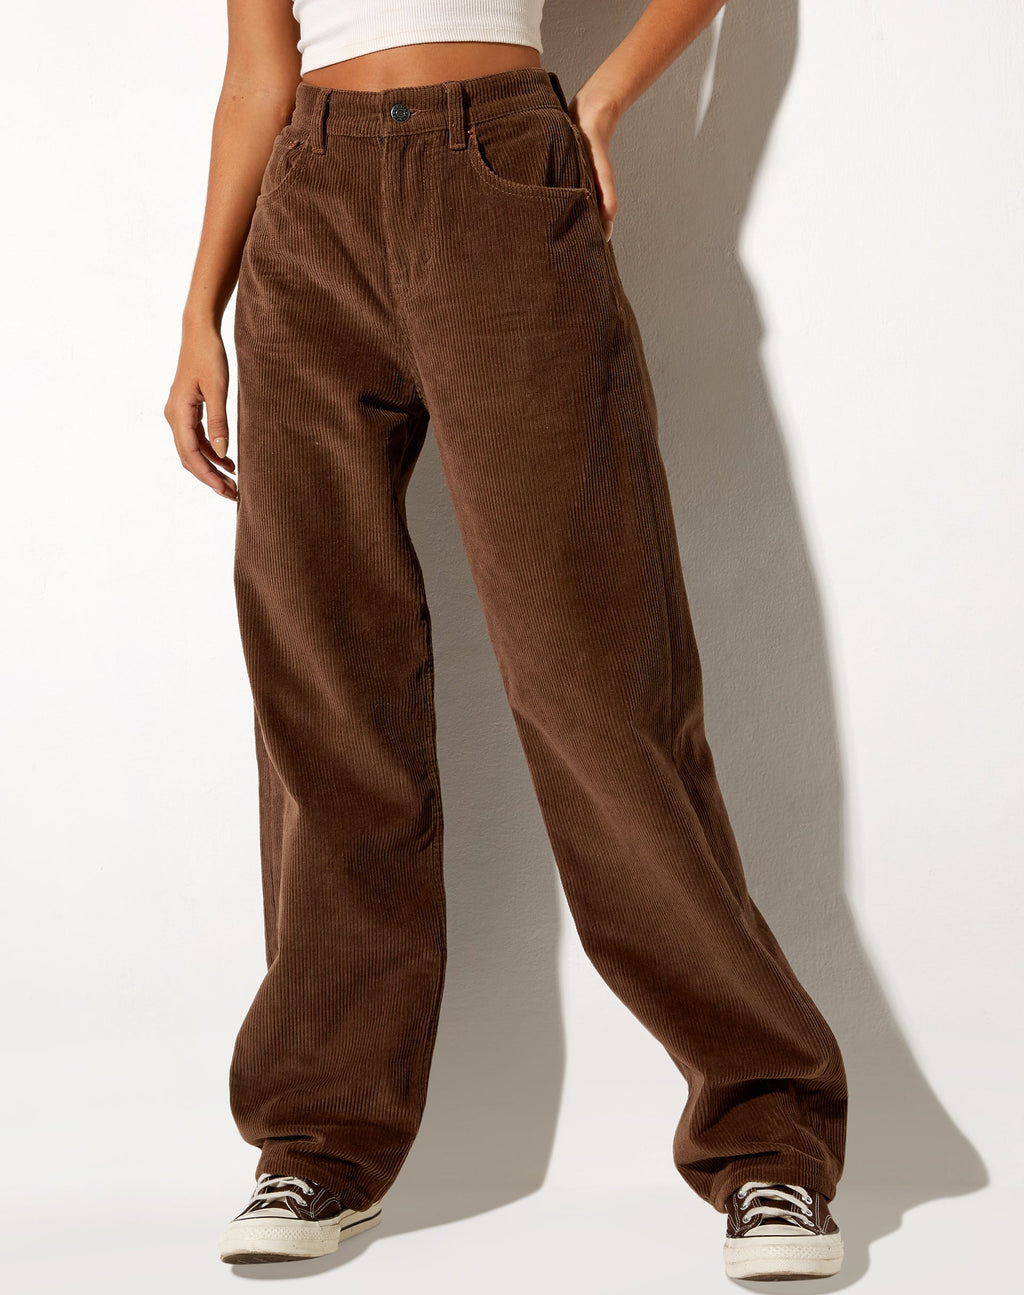 Parallel Jeans in Cord Dark Chocolate